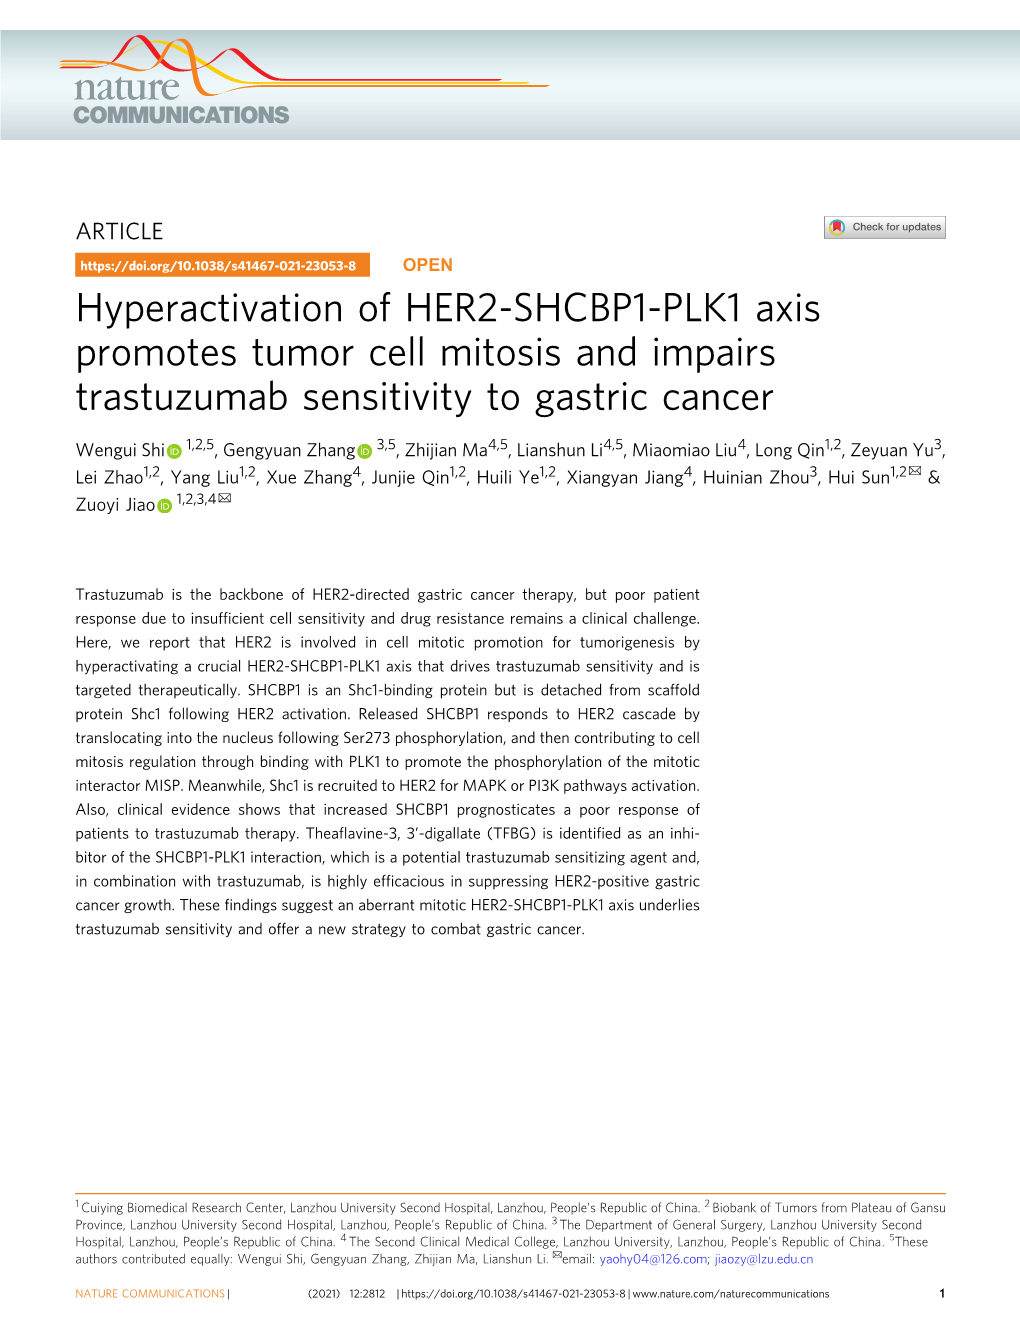 Hyperactivation of HER2-SHCBP1-PLK1 Axis Promotes Tumor Cell Mitosis and Impairs Trastuzumab Sensitivity to Gastric Cancer